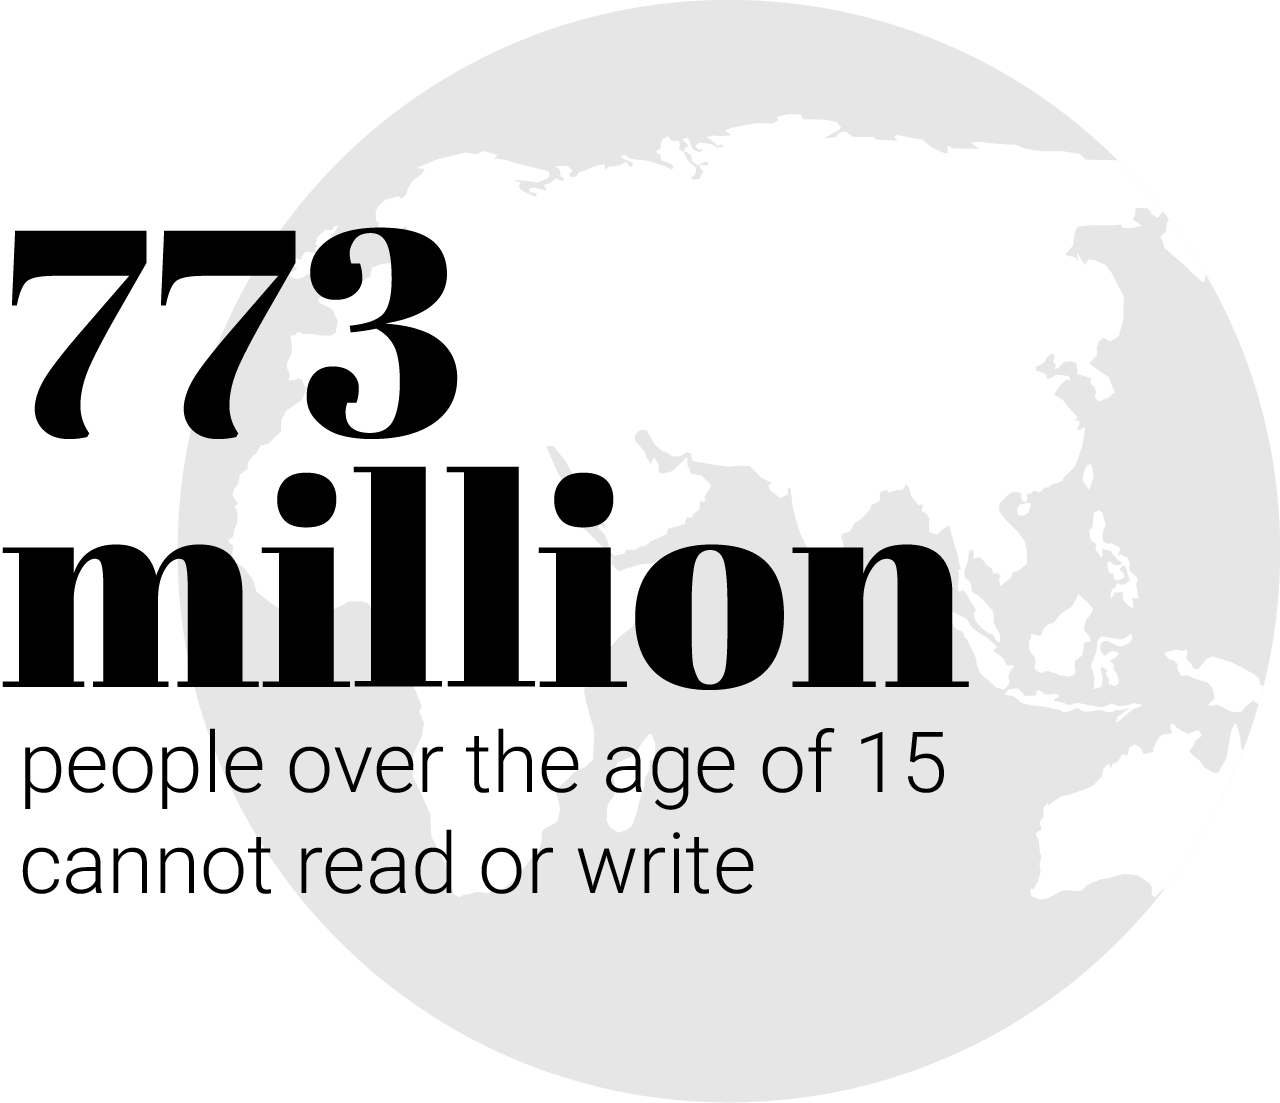 773 million people over the age of 15 cannot read or write, and “250 million children are failing to acquire basic literacy skills,” according to UNESCO.